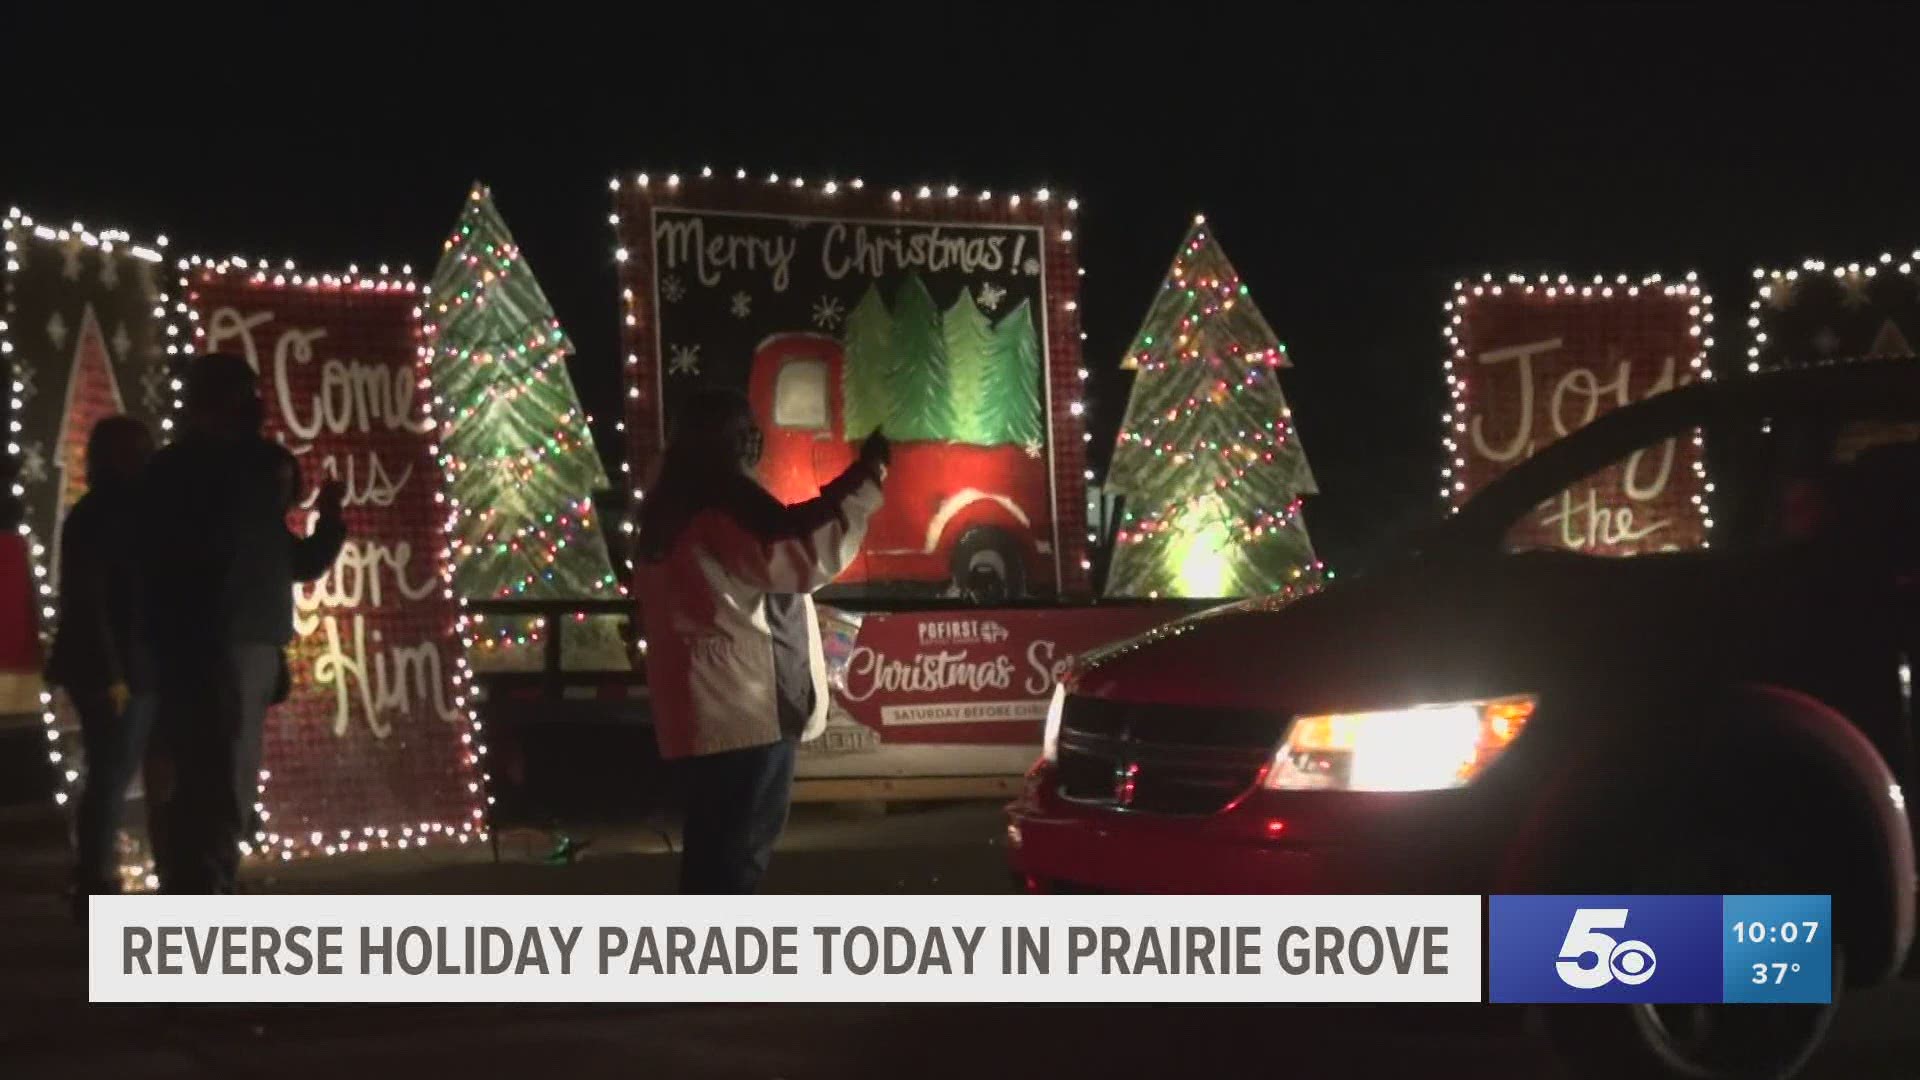 The parade had a larger turnout than organizers expected, they say around 400 vehicles passed through their line.